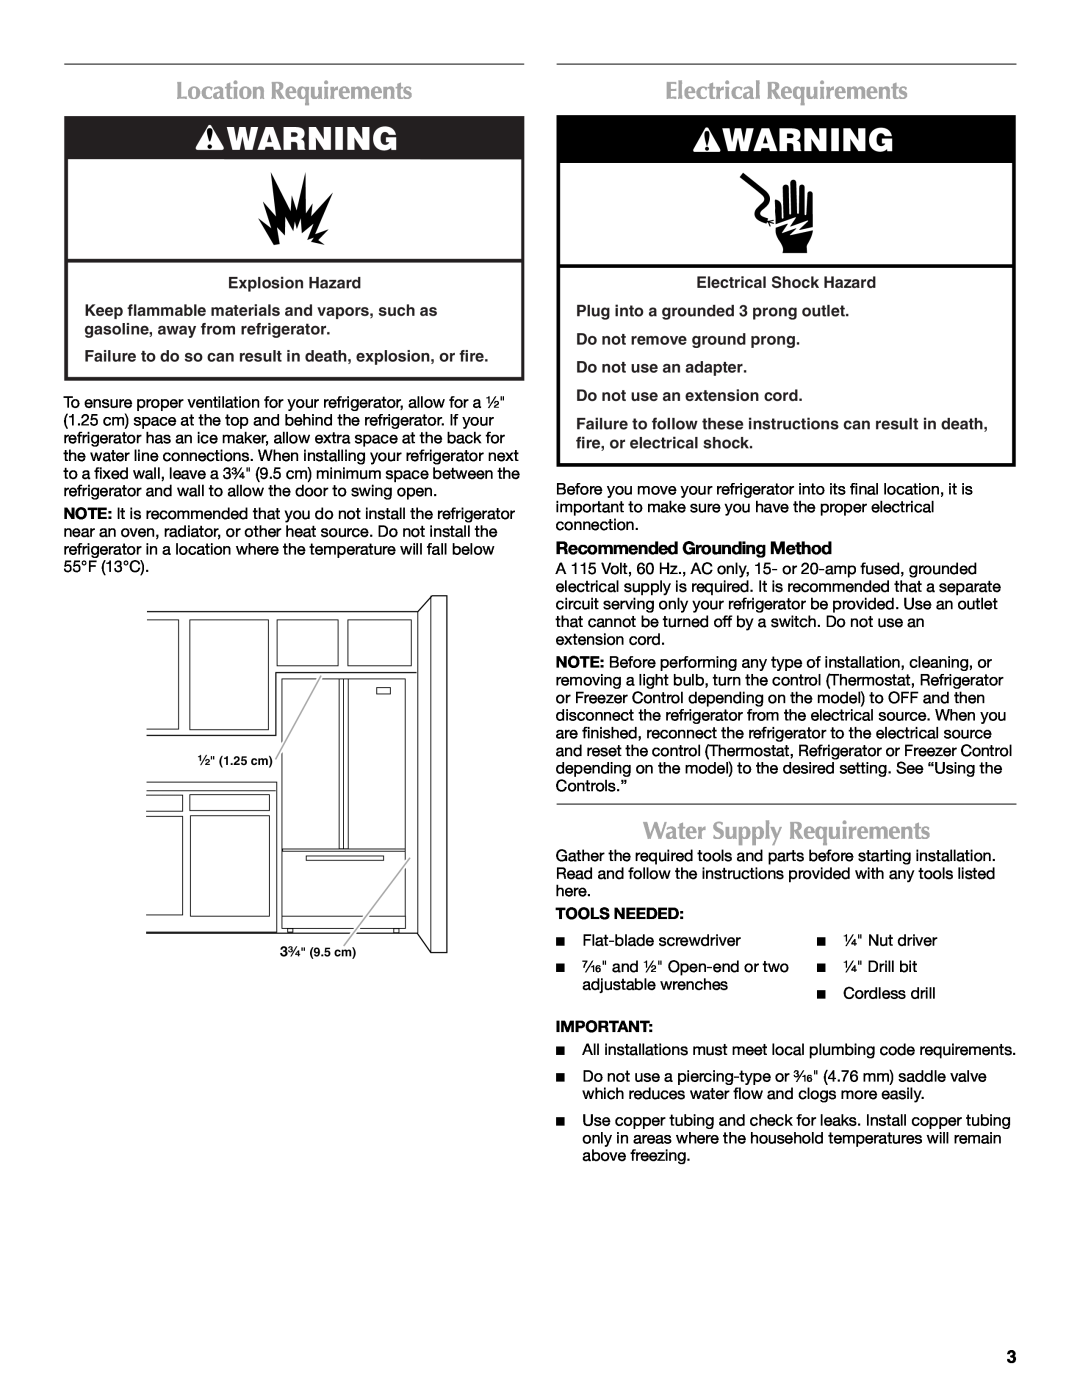 Maytag W10175444A Location Requirements, Electrical Requirements, Water Supply Requirements, Recommended Grounding Method 